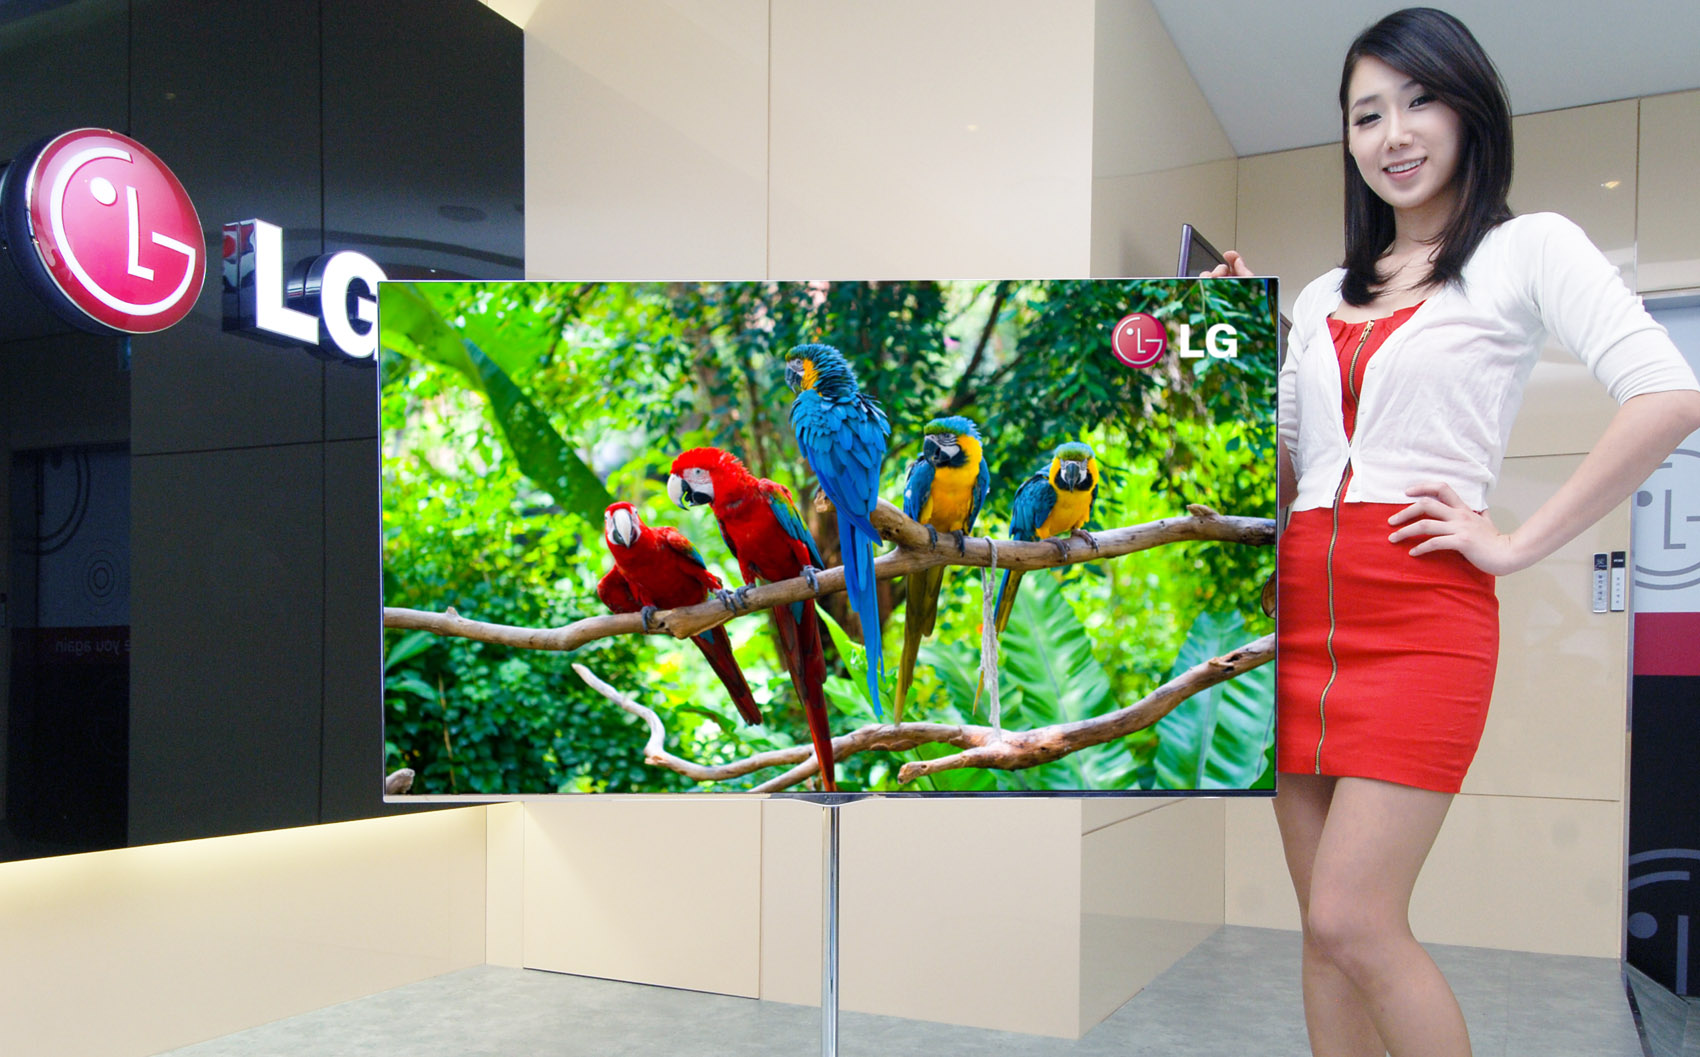 New LG OLED TV - 55 inches launched in Korea